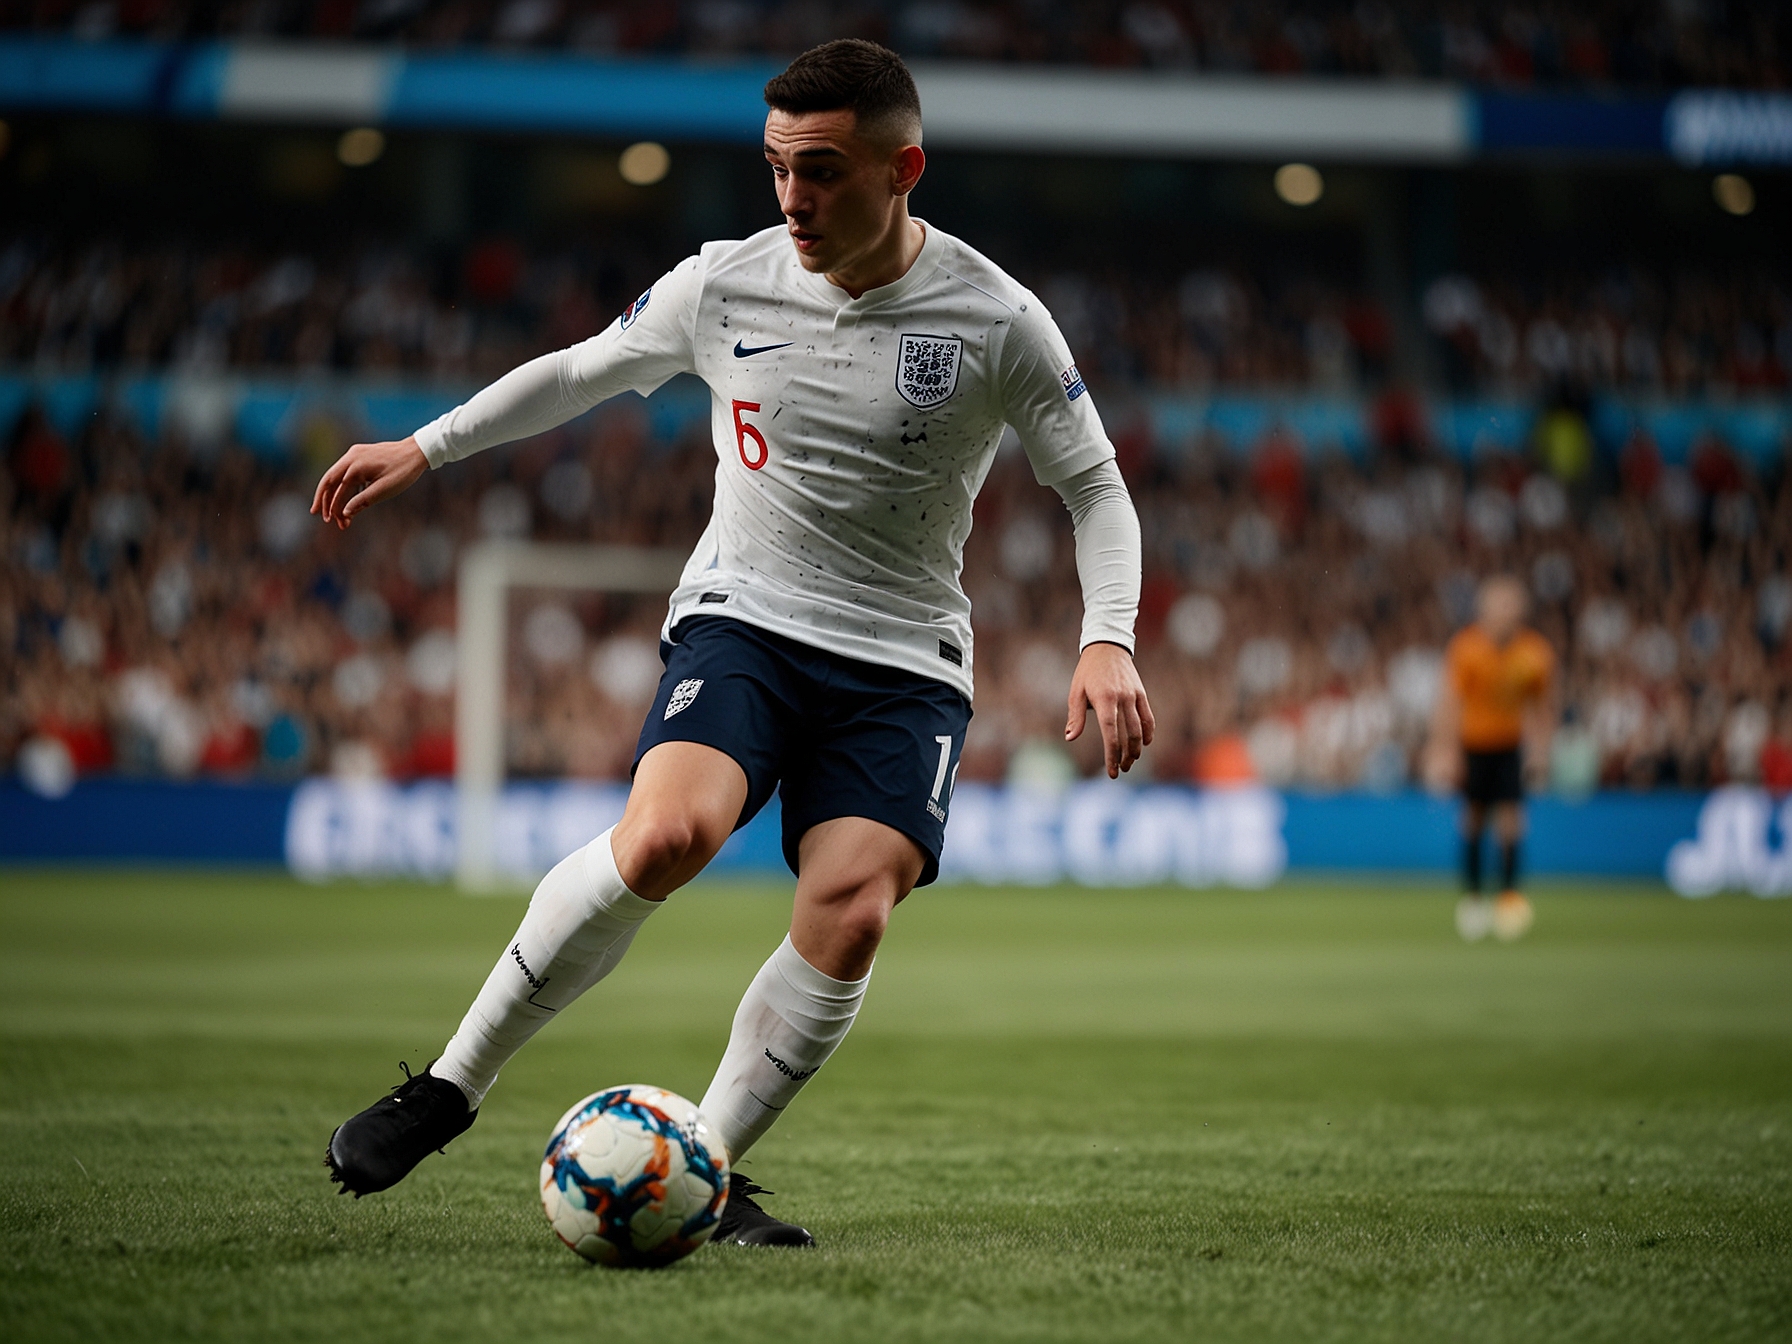 An image of Phil Foden in action during a Euro 2024 match, showcasing his dribbling skills as he maneuvers through the opposition. His focus and determination are evident as he attempts to make an impact for England.